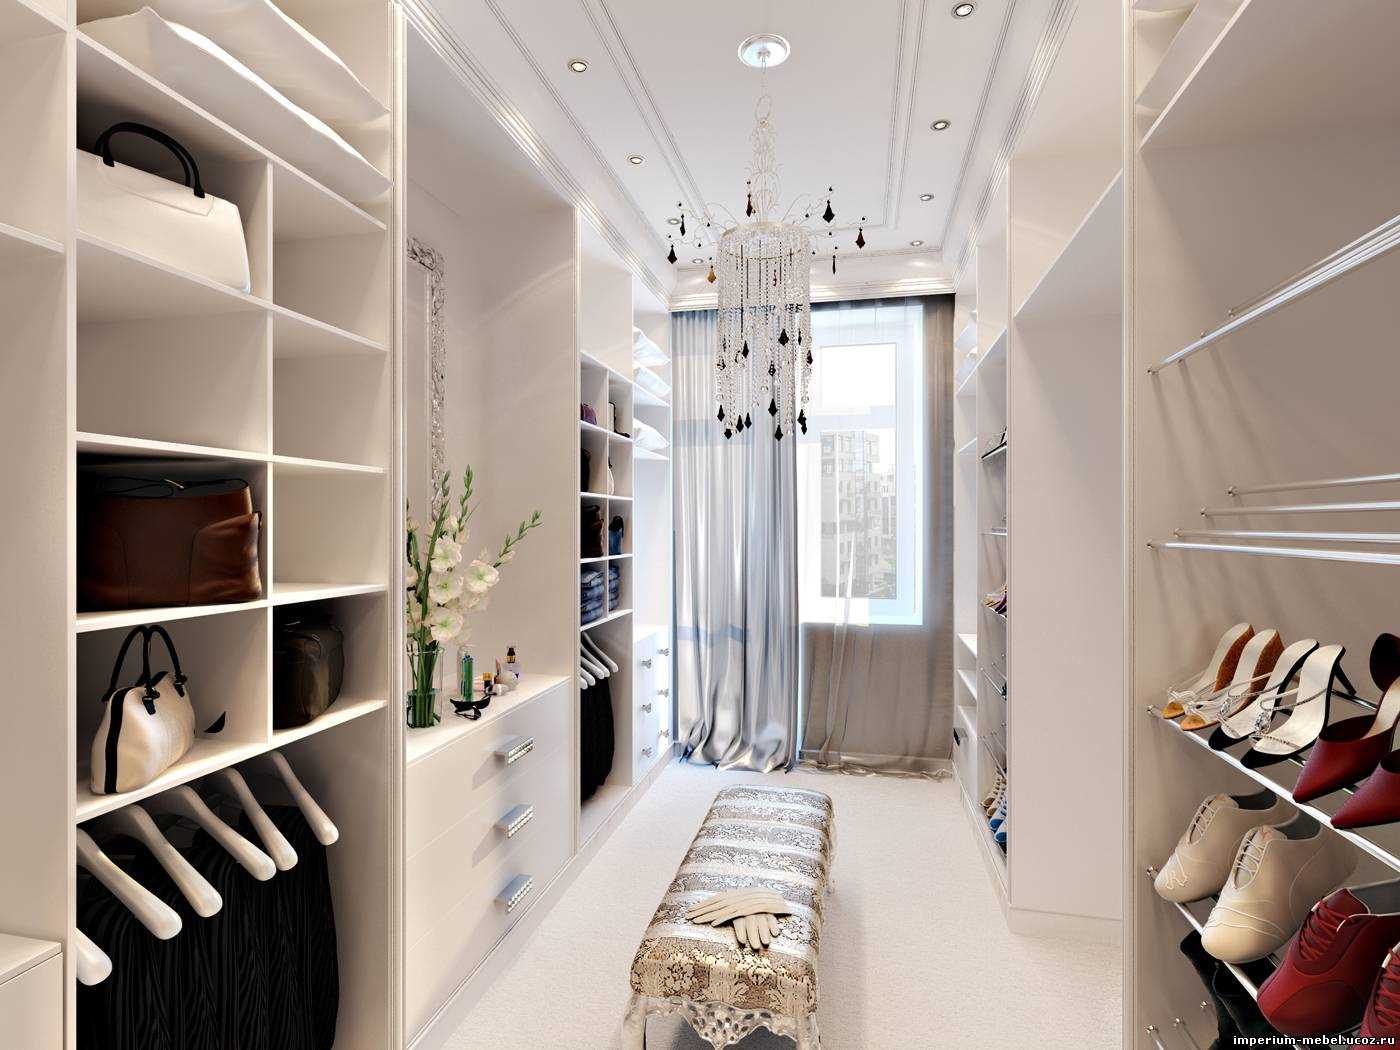 variant of a beautiful dressing room design